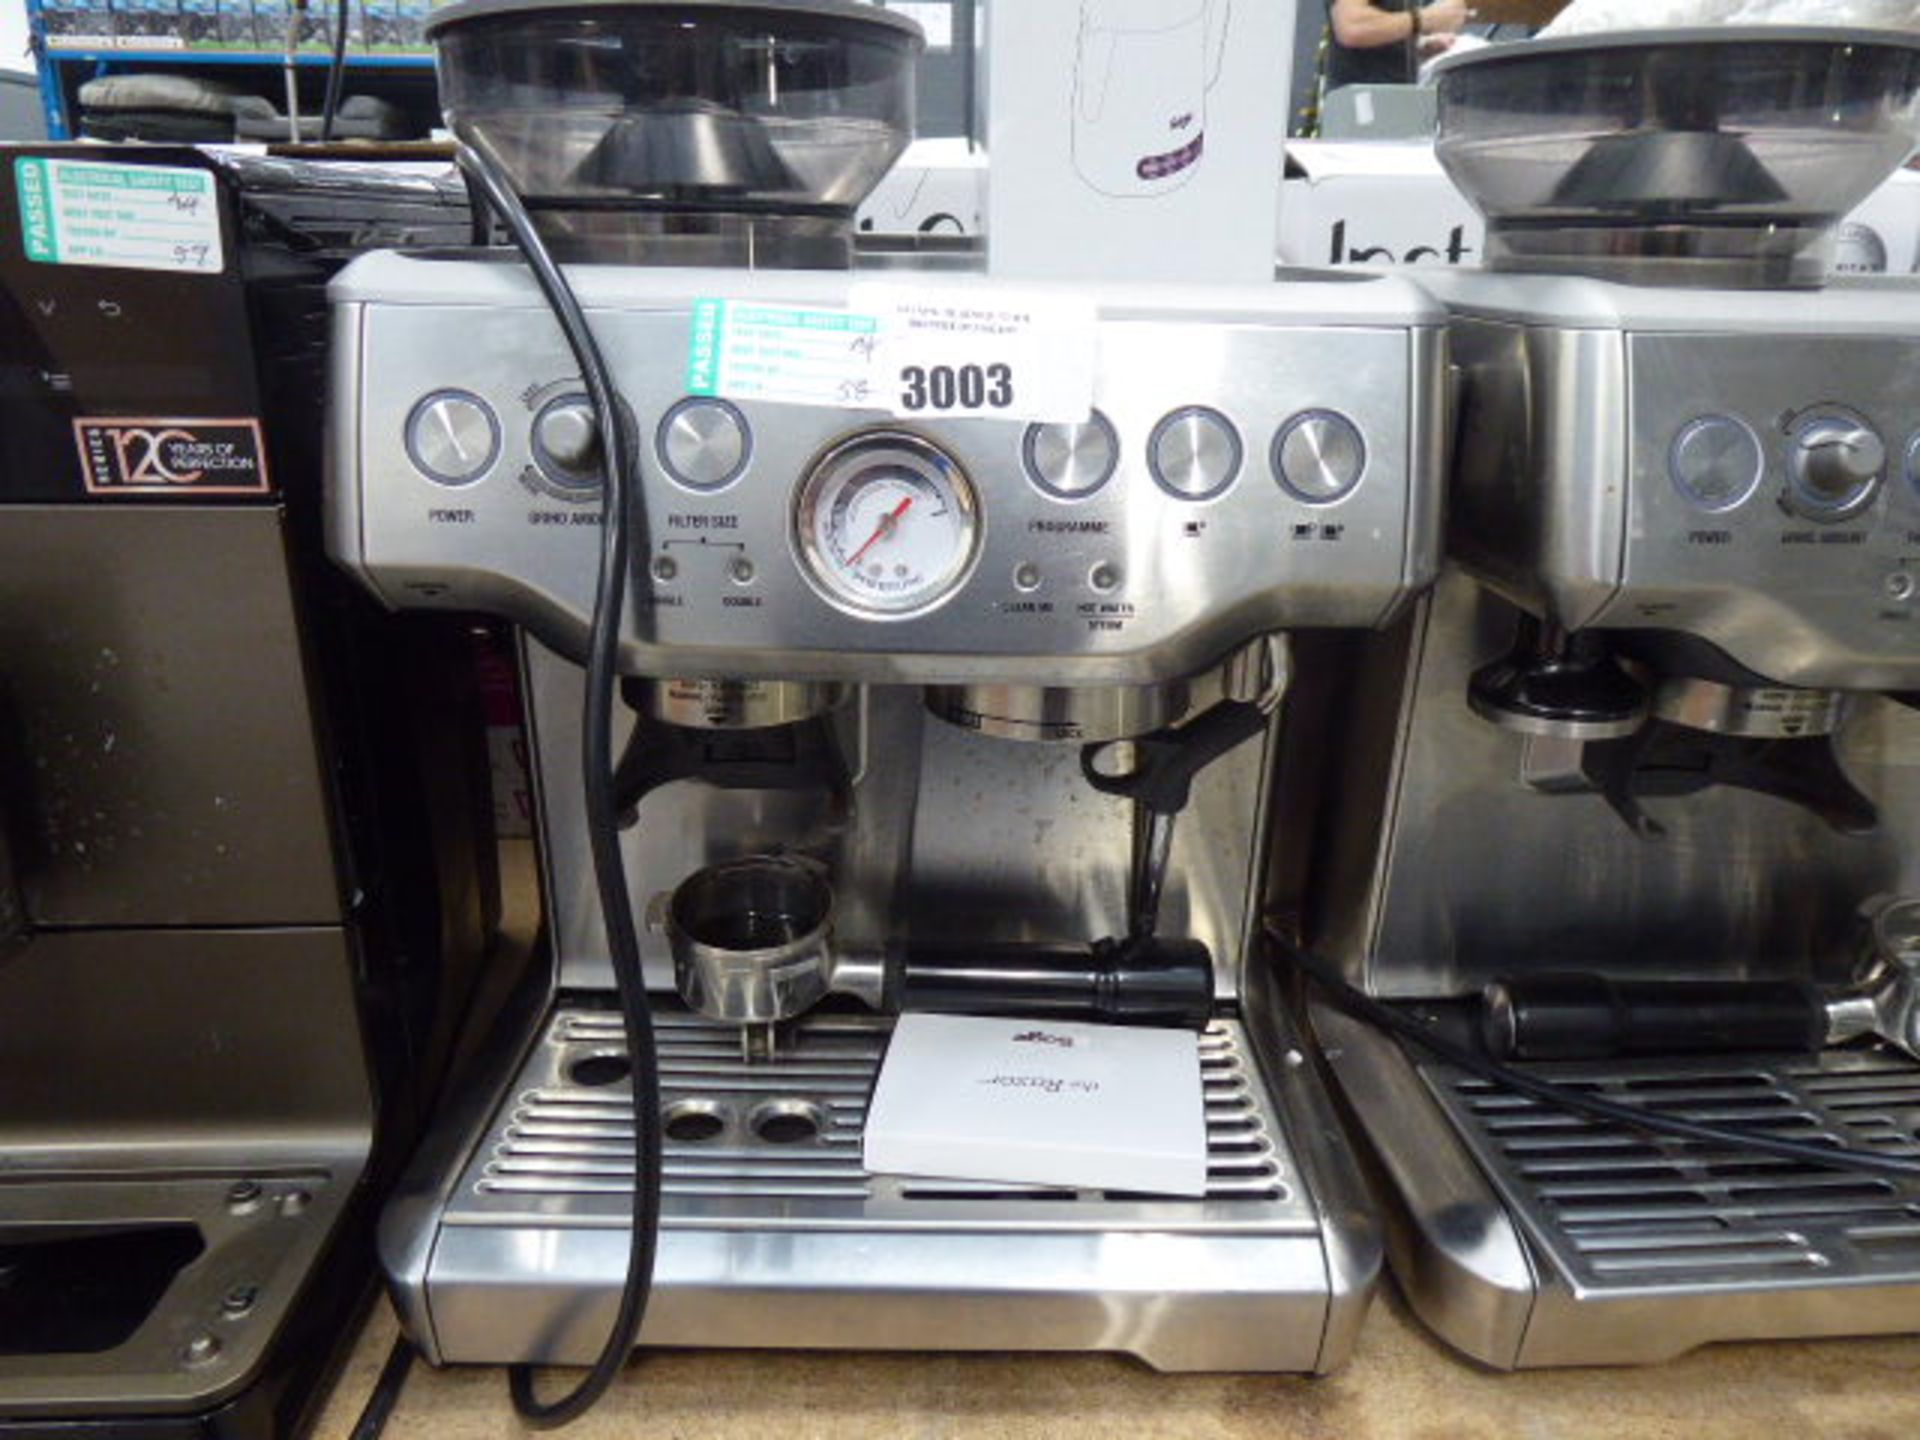 52 Unboxed Sage Barister Express coffee machine with some accessories